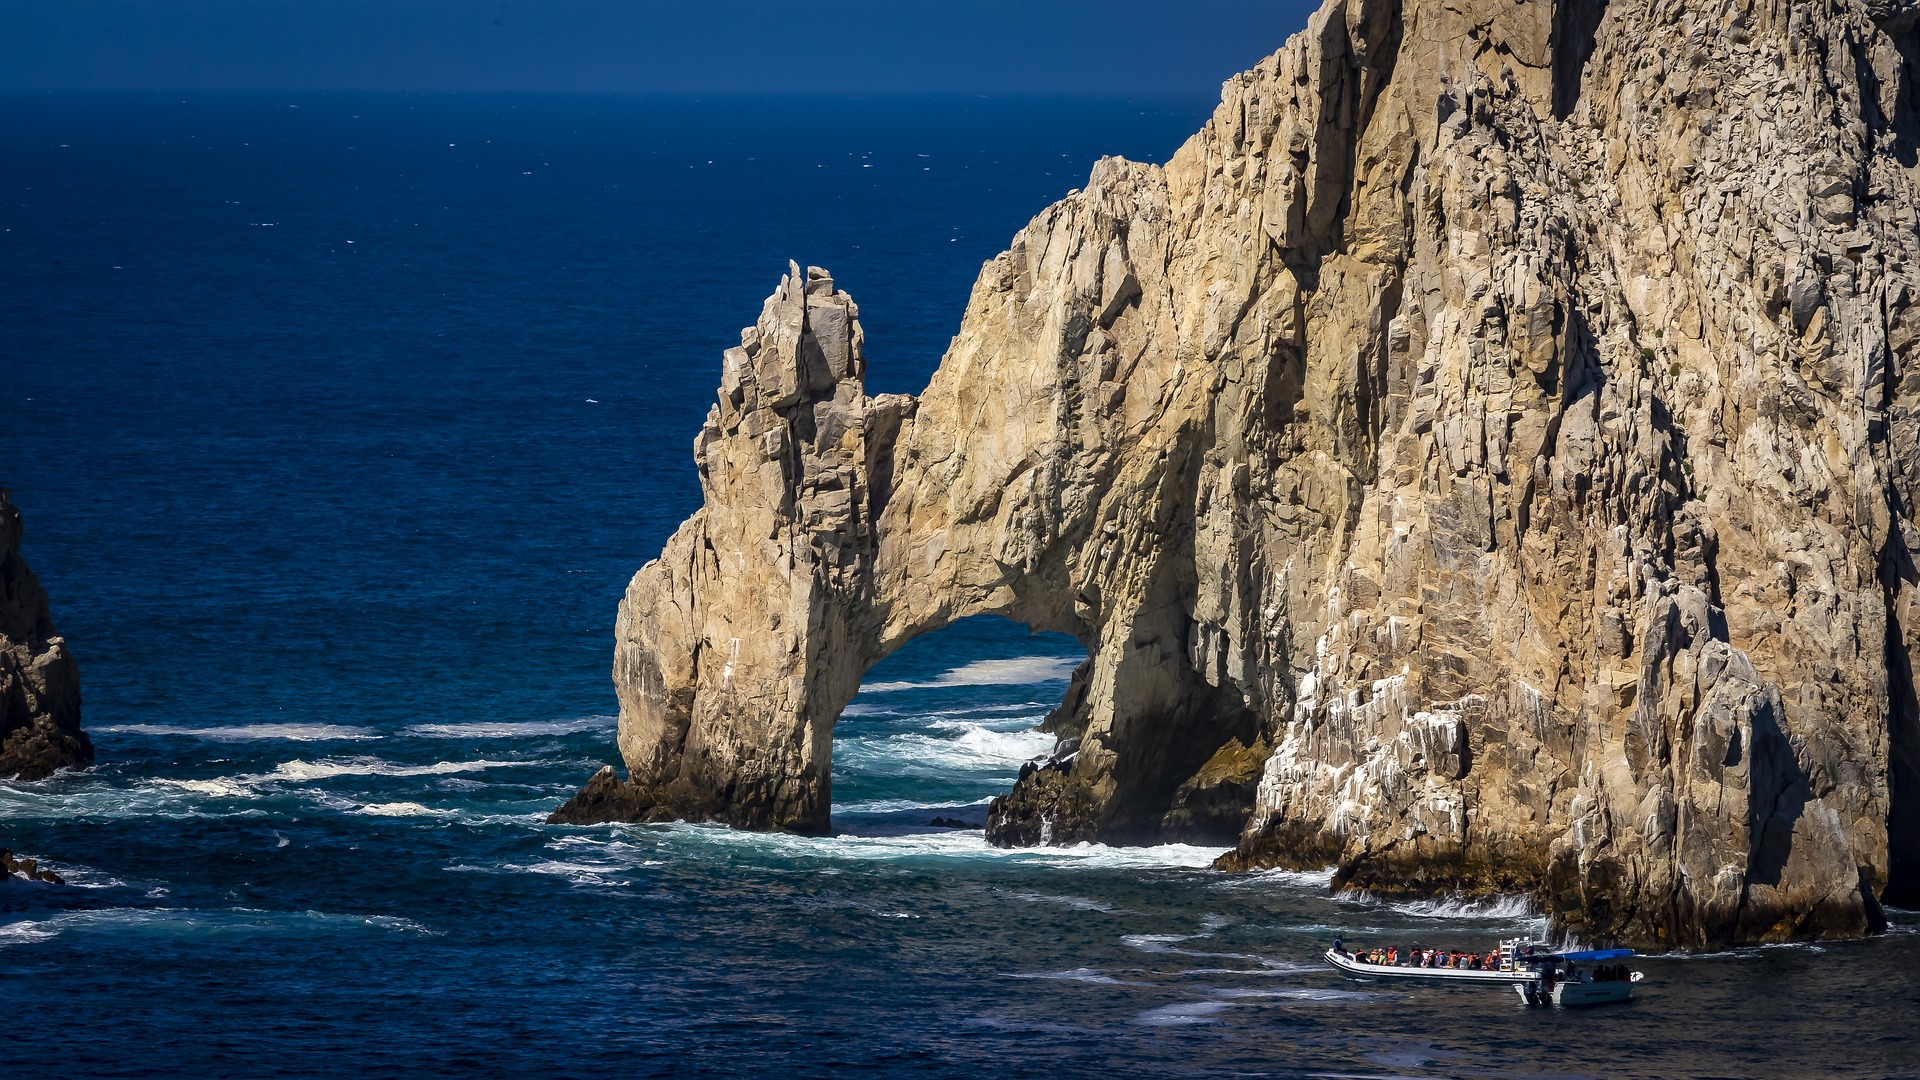 The Breathtaking City of Cabo San Lucas: 4 Things to Know